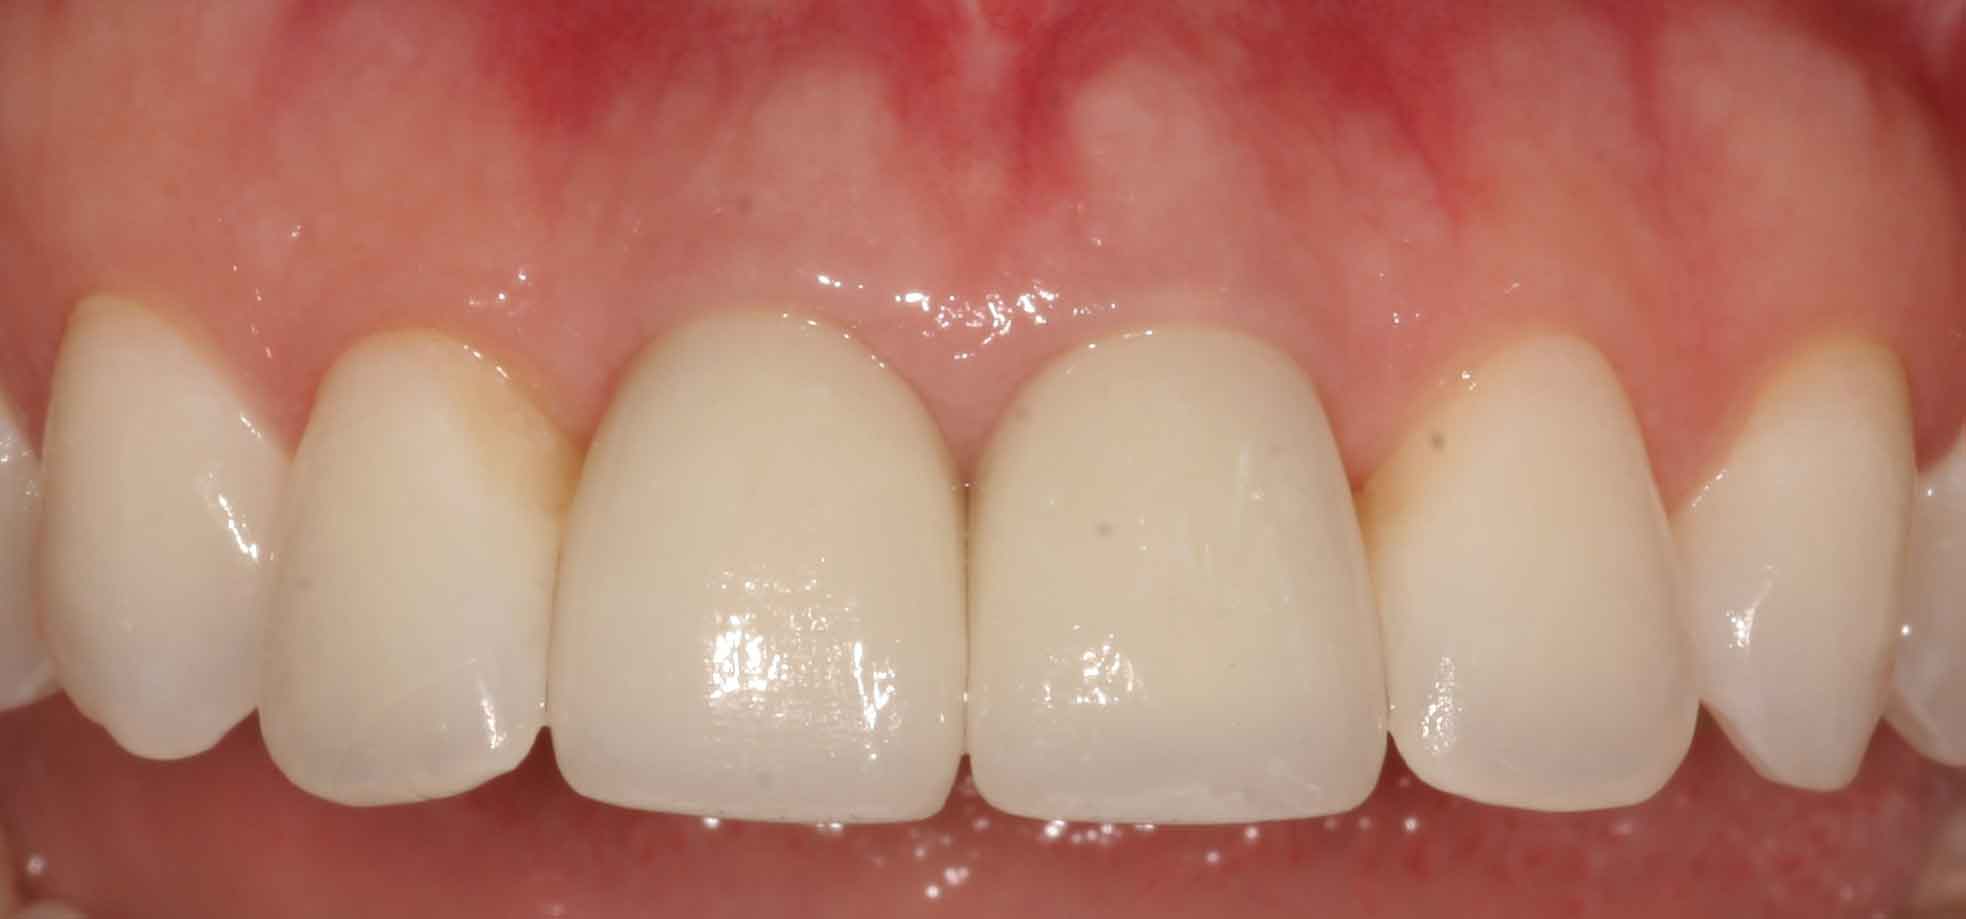 Pittsburgh Pittsburgh periodontist picture after crown lengthening